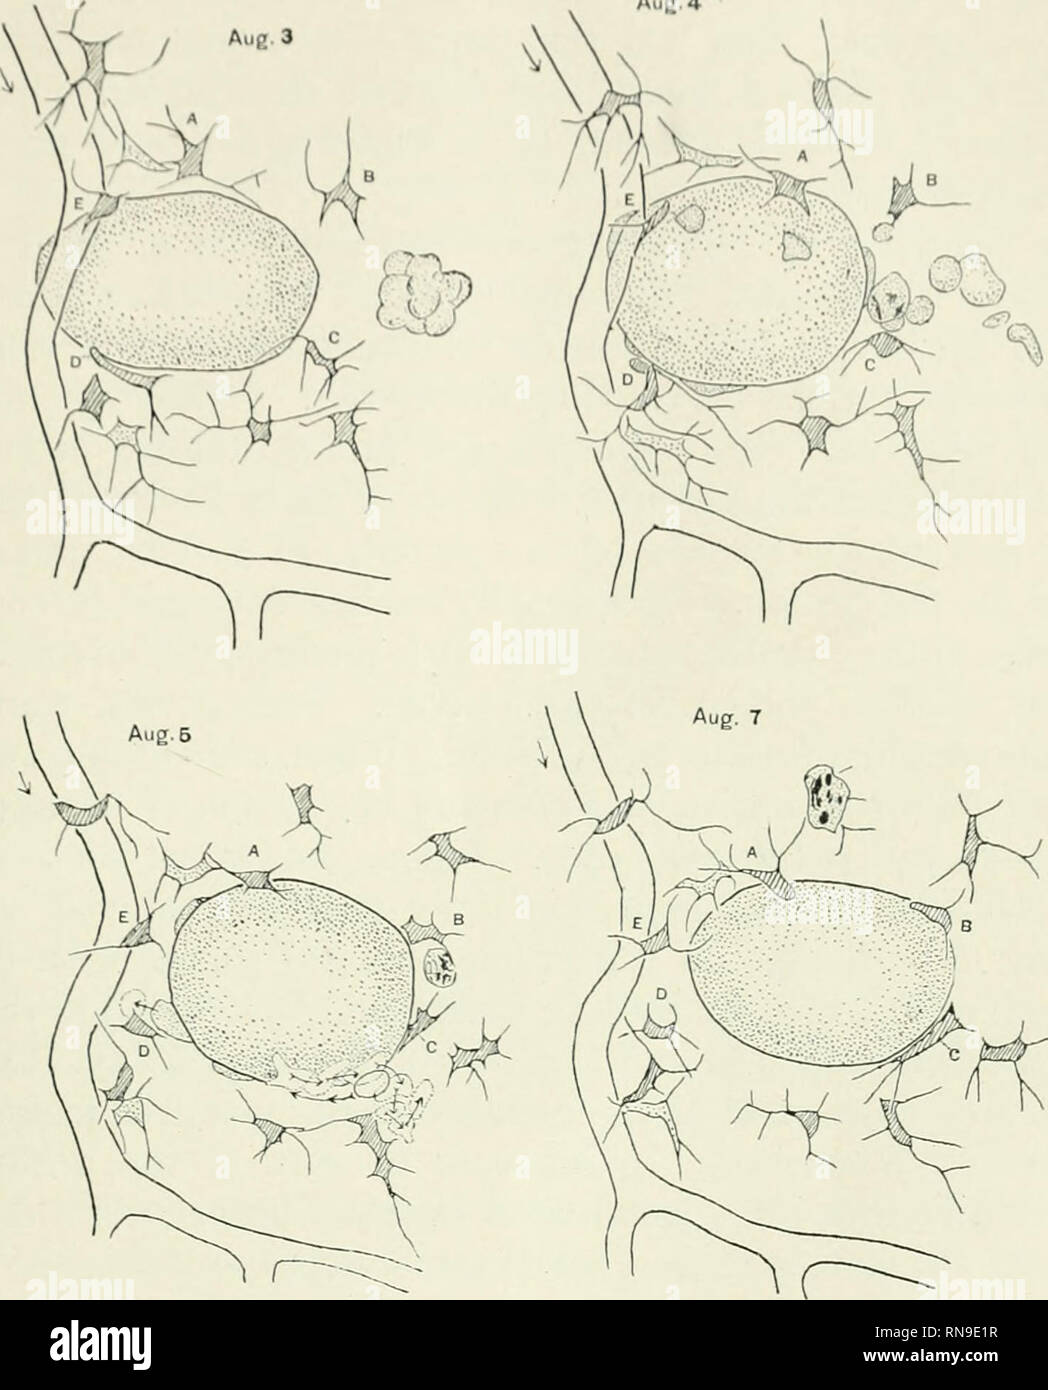 . The anatomical record. Anatomy; Anatomy. MESENCllVMK CKLLS IX TAI)-1'()LK S TAIL 11 Aug. 4. Fig. 2 From larva of Rana catesbiana, 10.5 mm. long. Two globules of paraffin oil injected into the ventral, and a small globule into the dorsal fin; all three remained. ]Iuch leucocytosis around each. The first drawing (Aug. 3) was made immediatel}- after the injection. Small mass of cellular debris is shown, in the path of the injection. Mesenchyme nearest the globule lettered as in fig. 1. In drawings Aug. 4, 5, and 7, some of the leucocytes about the globule are shown. In drawing of Aug. 5 are sh Stock Photo